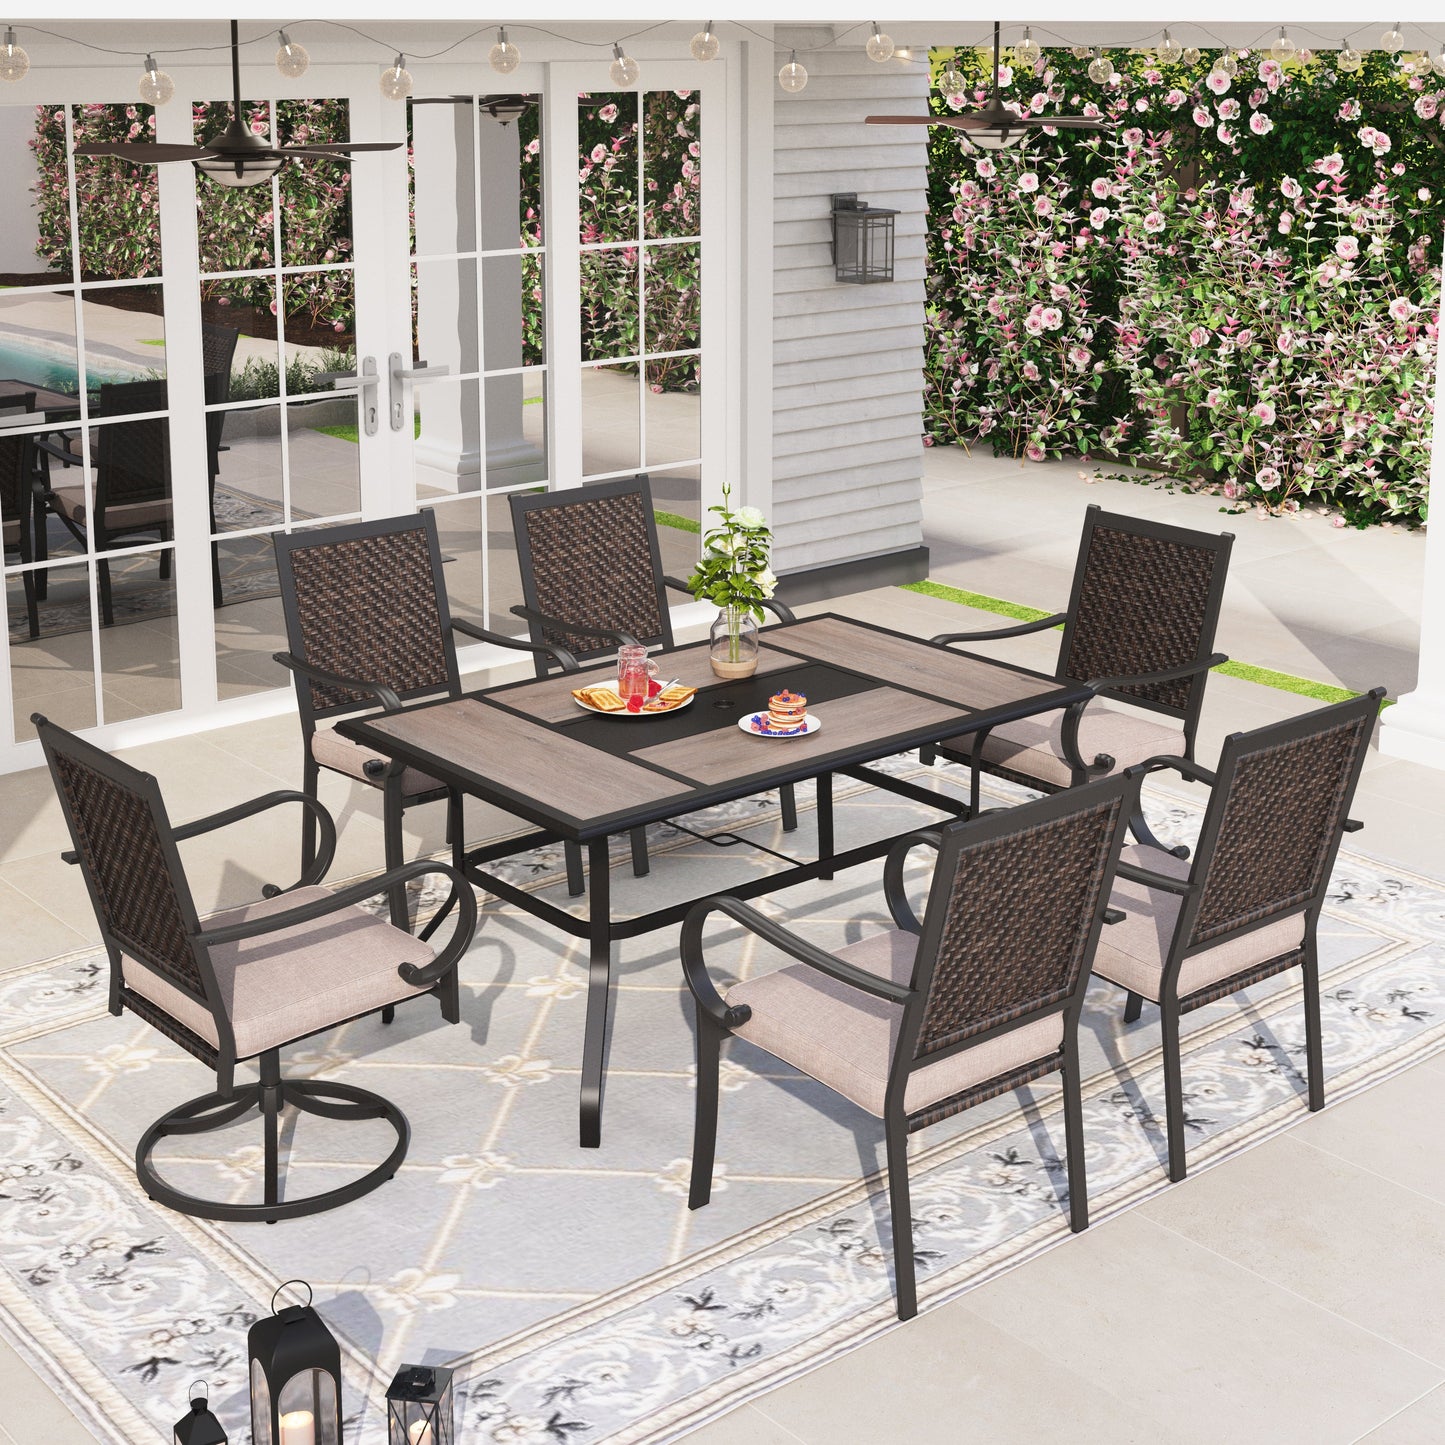 Sophia & William 7 Pieces Outdoor Patio Dining Set with 2 Swivel Wicker Chairs, 4 Fixed Wicker Chairs, and 1 Steel Table